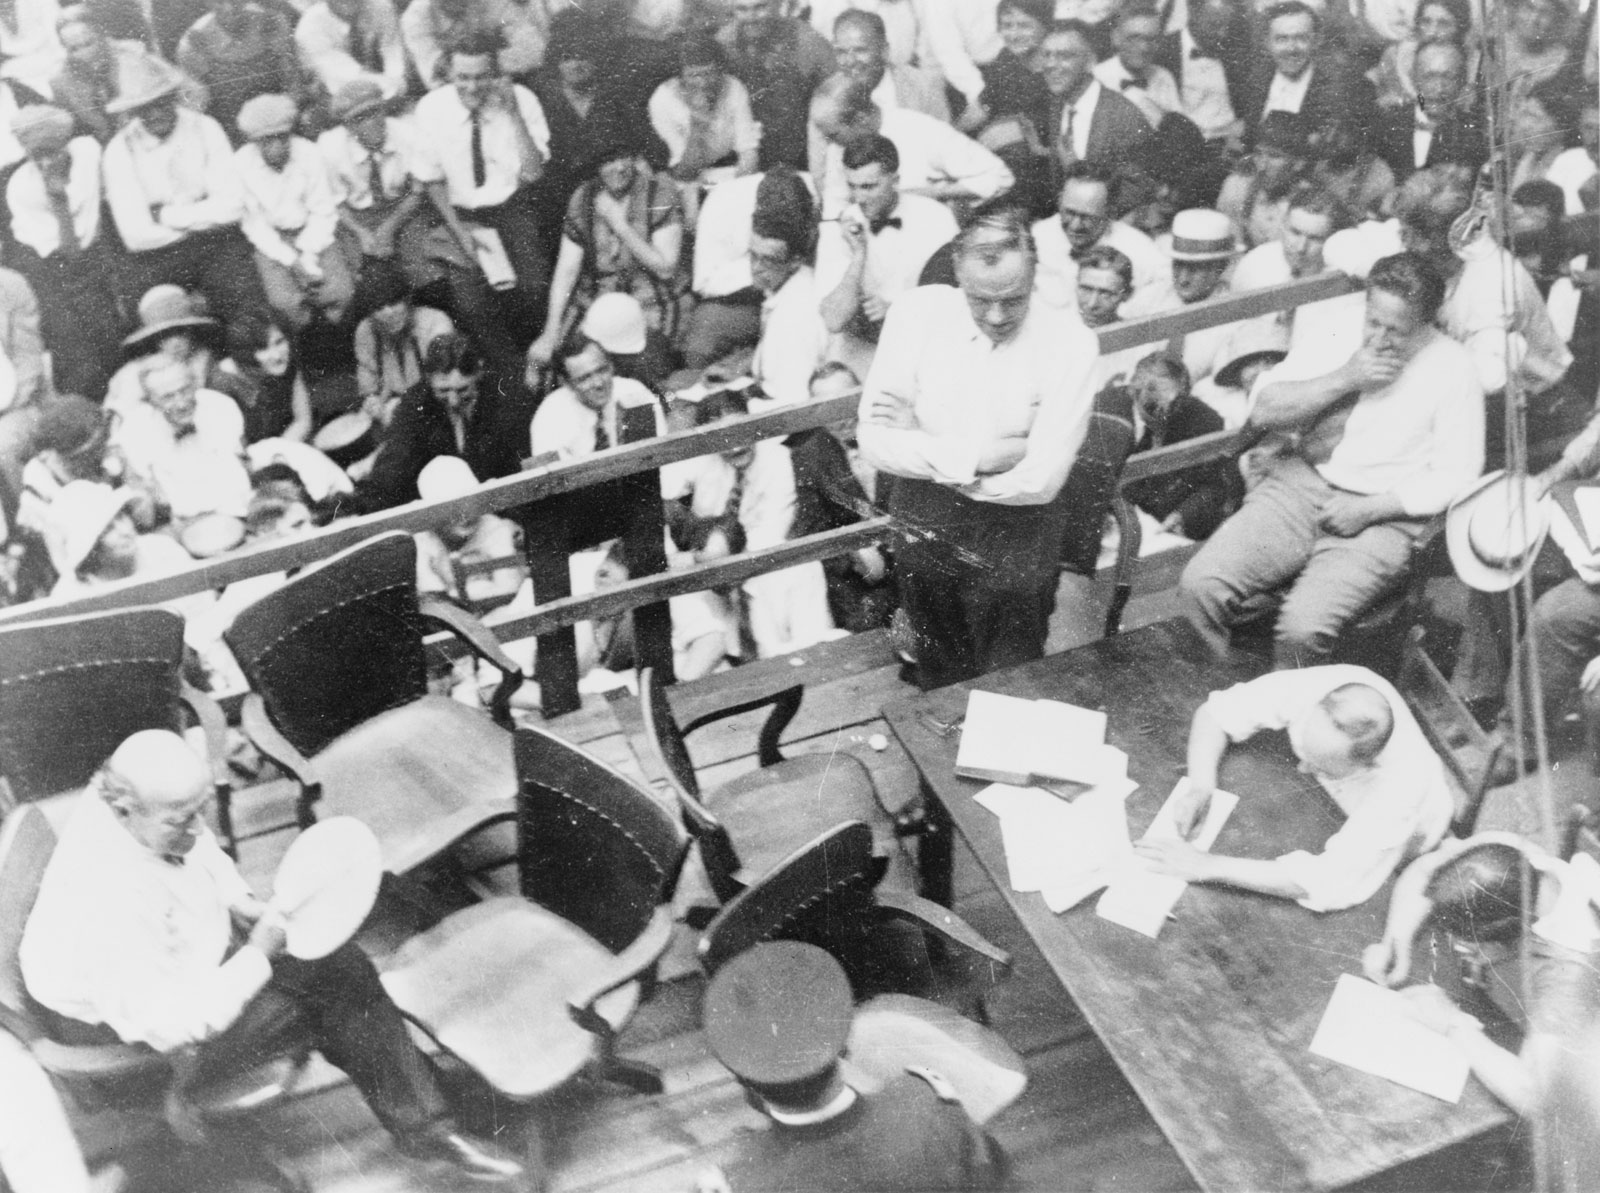 1925 Teacher John Scopes' trial pits creation against evolution in Tennessee